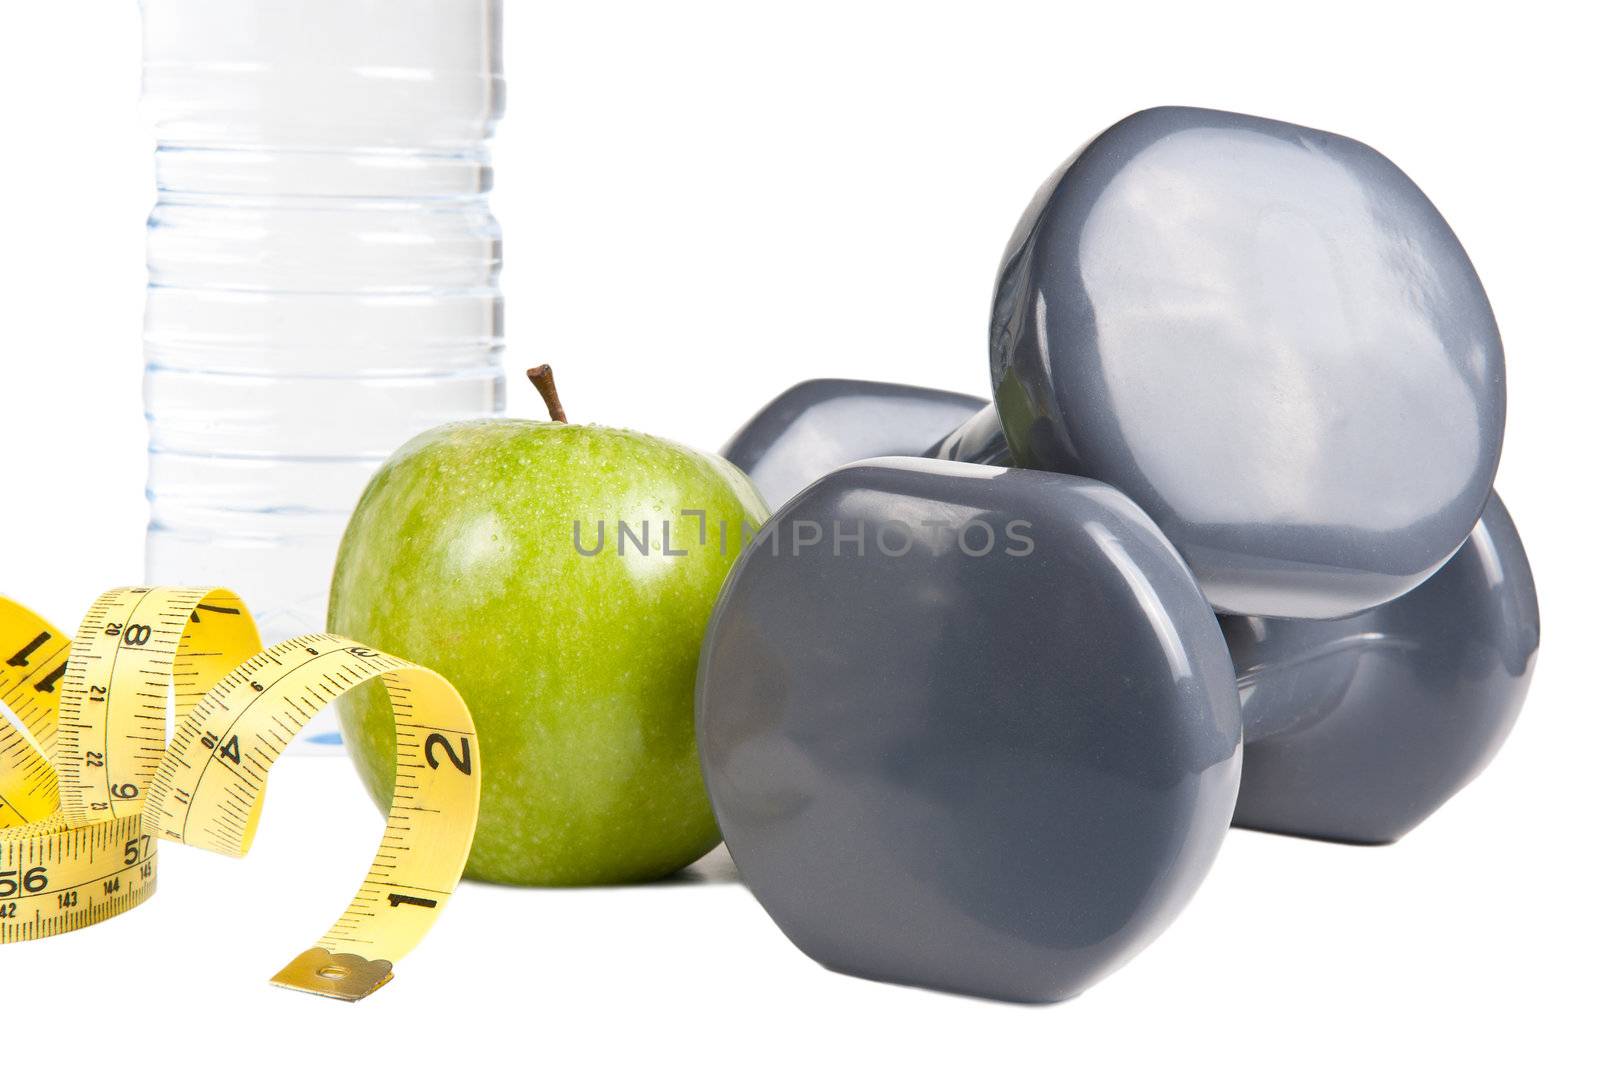 Pair of dumbbells, green apple, measuring tape and bottle of water. Exercise and healthy diet concept.